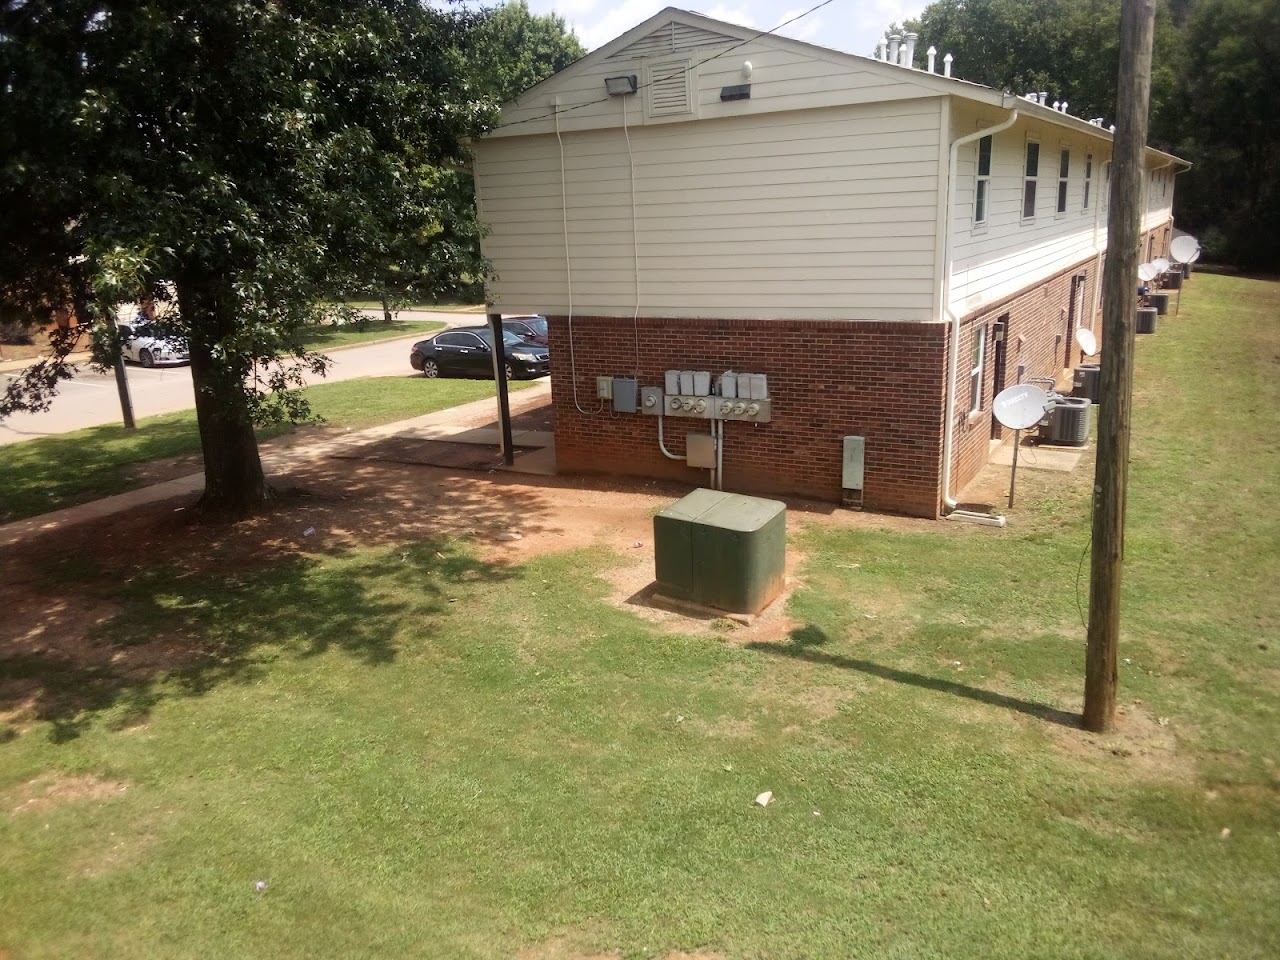 Photo of ATHENS GARDENS APARTMENTS. Affordable housing located at 135 COLERIDGE CT ATHENS, GA 30605